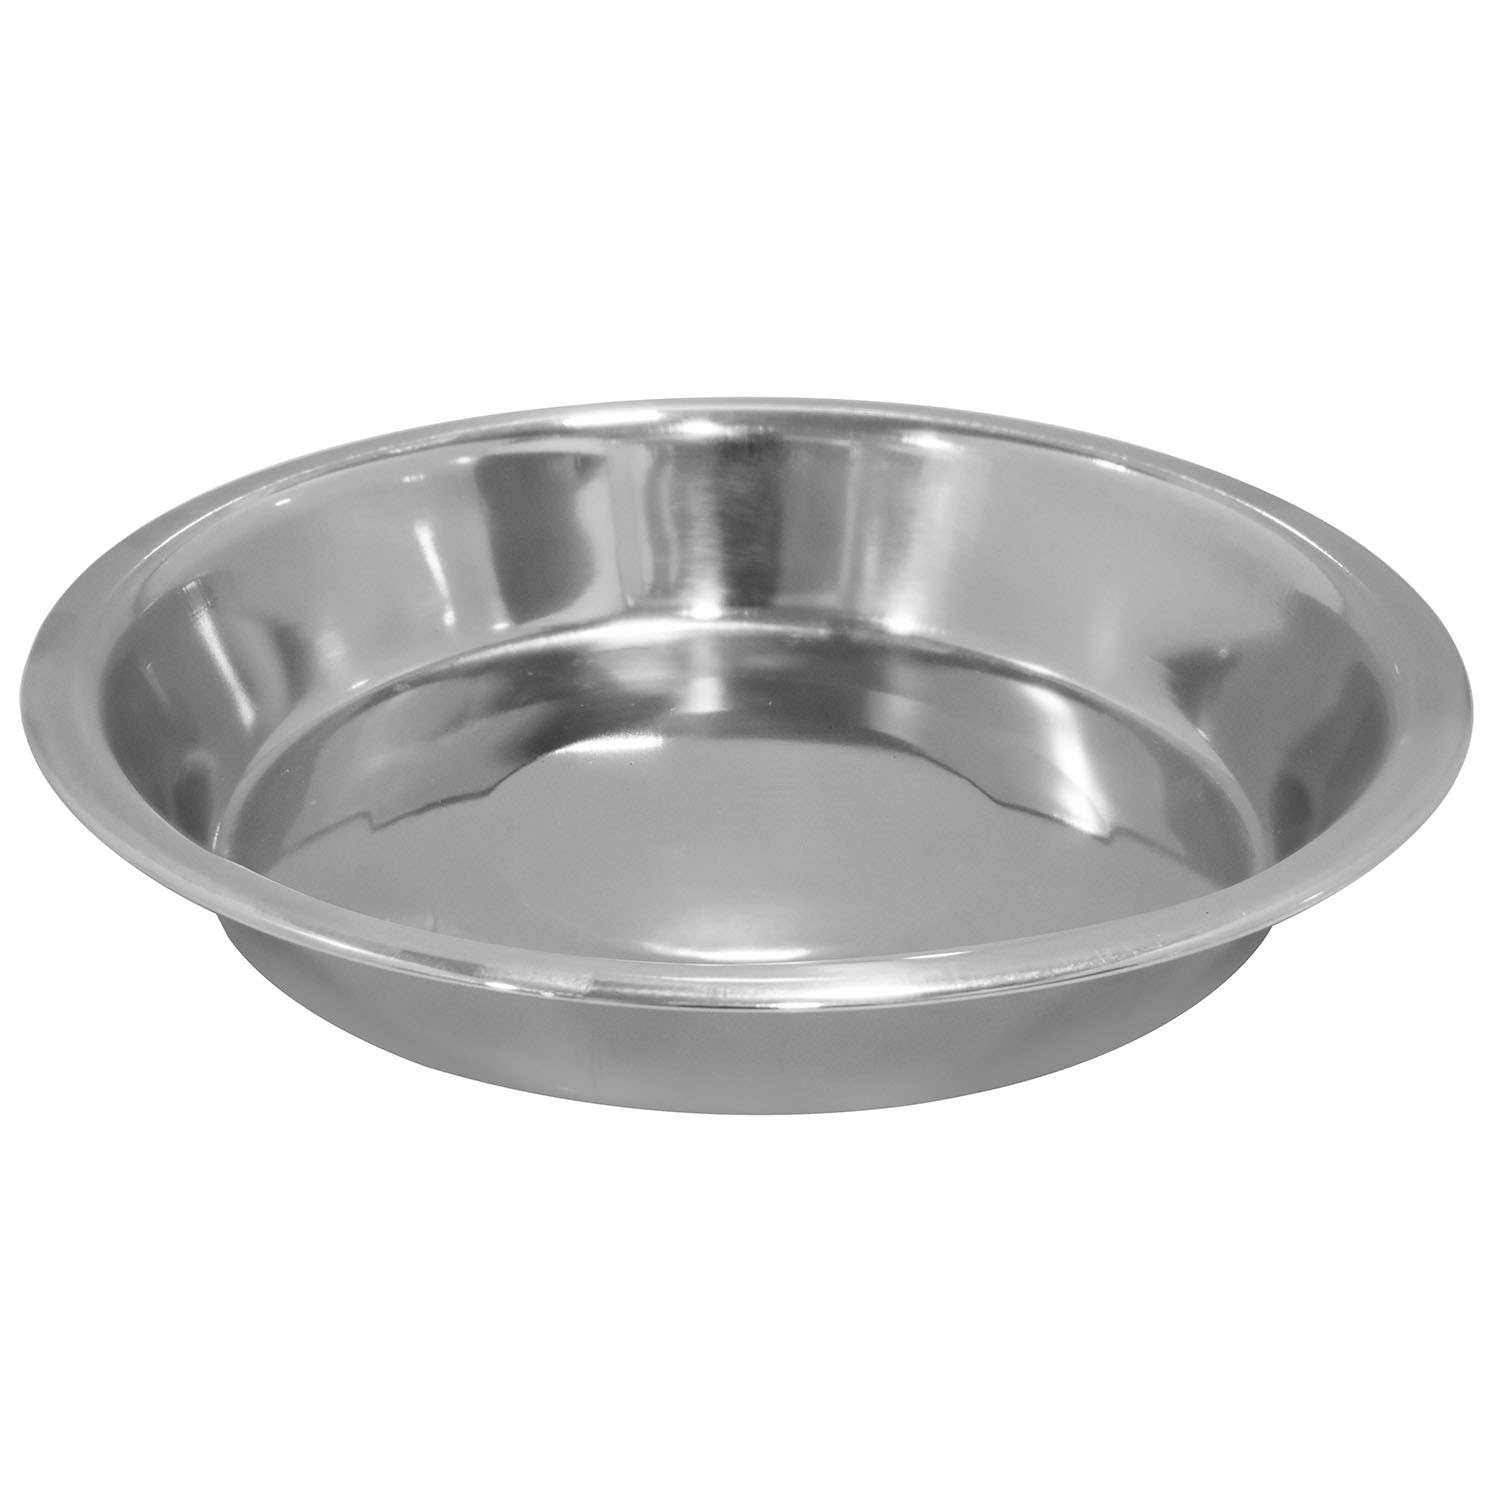 Clever Paws Medium Stainless Steel Puppy Bowl Image